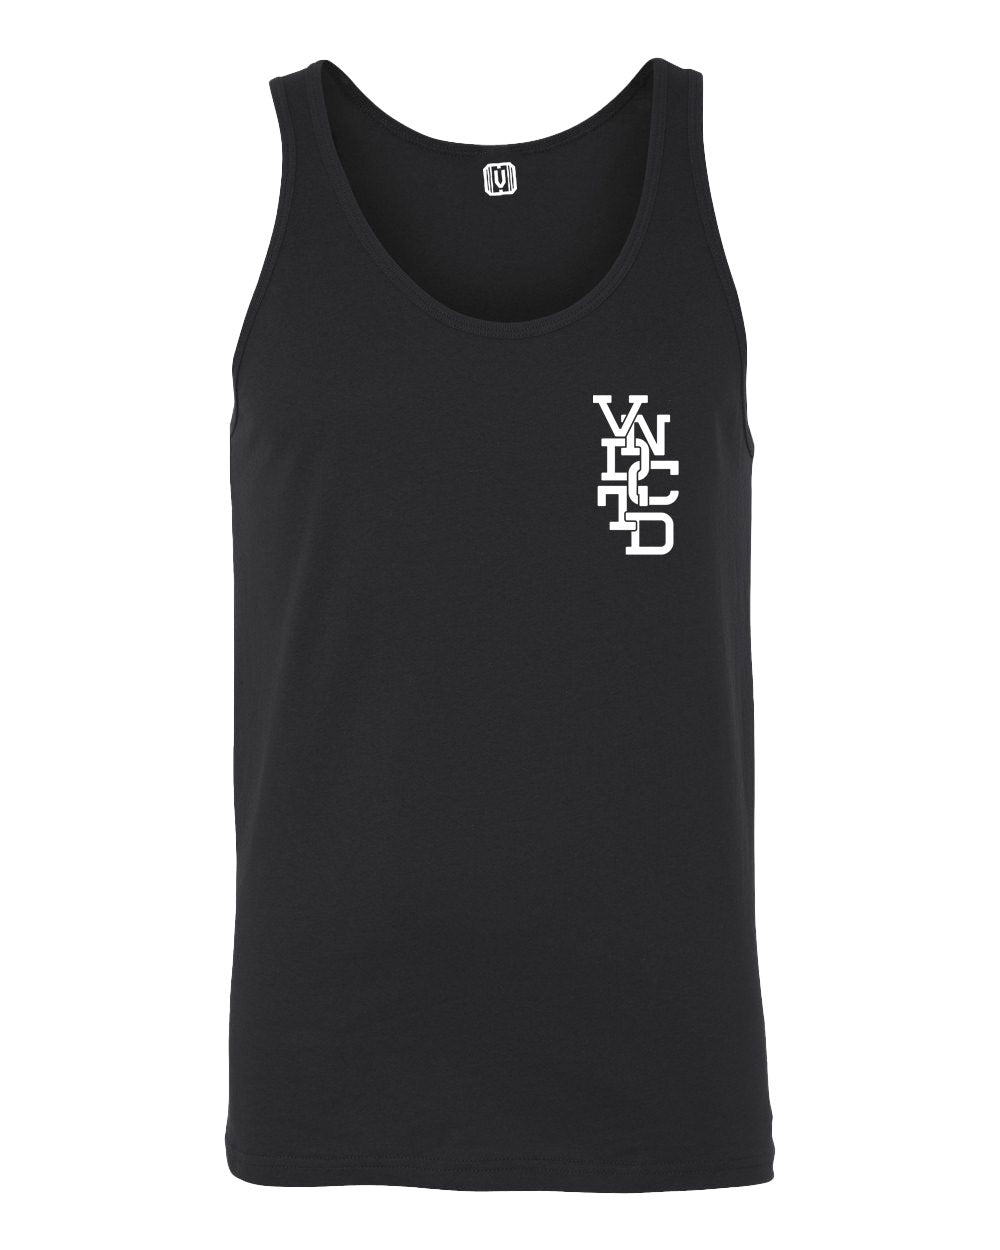 "The Connection" Black Vindicated Tank Top